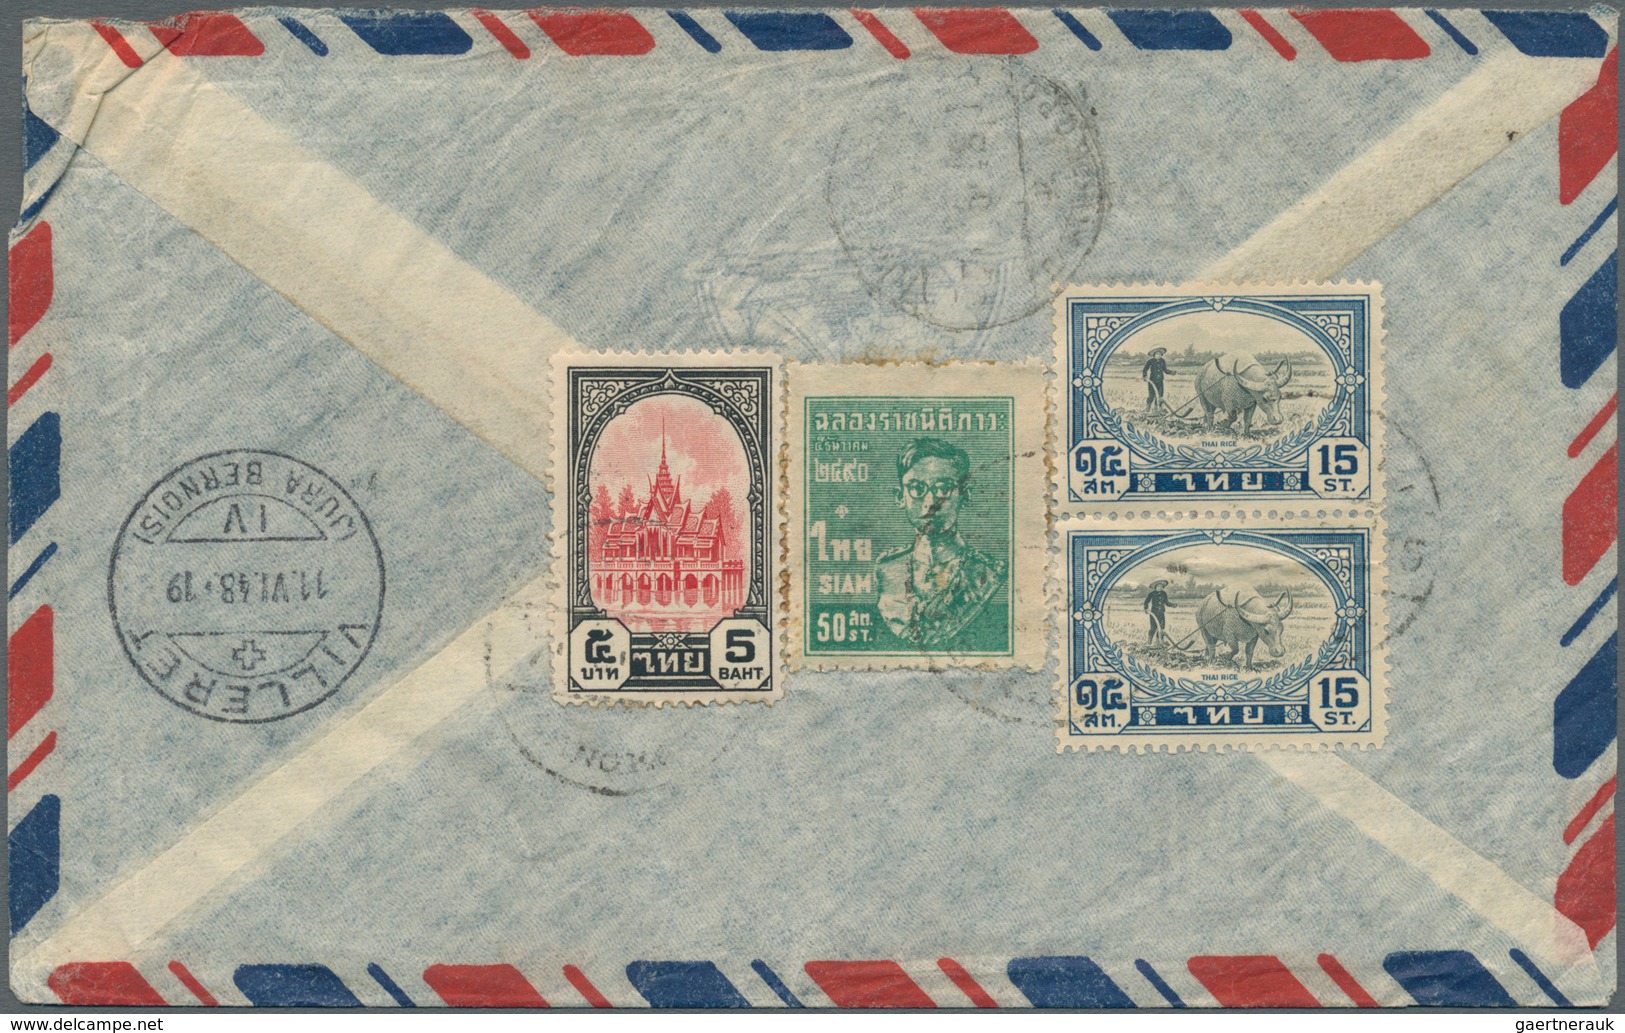 24235 Thailand: 1893/1973: Very fine lot of 61 envelopes, used picture postcards and postal stationeries w